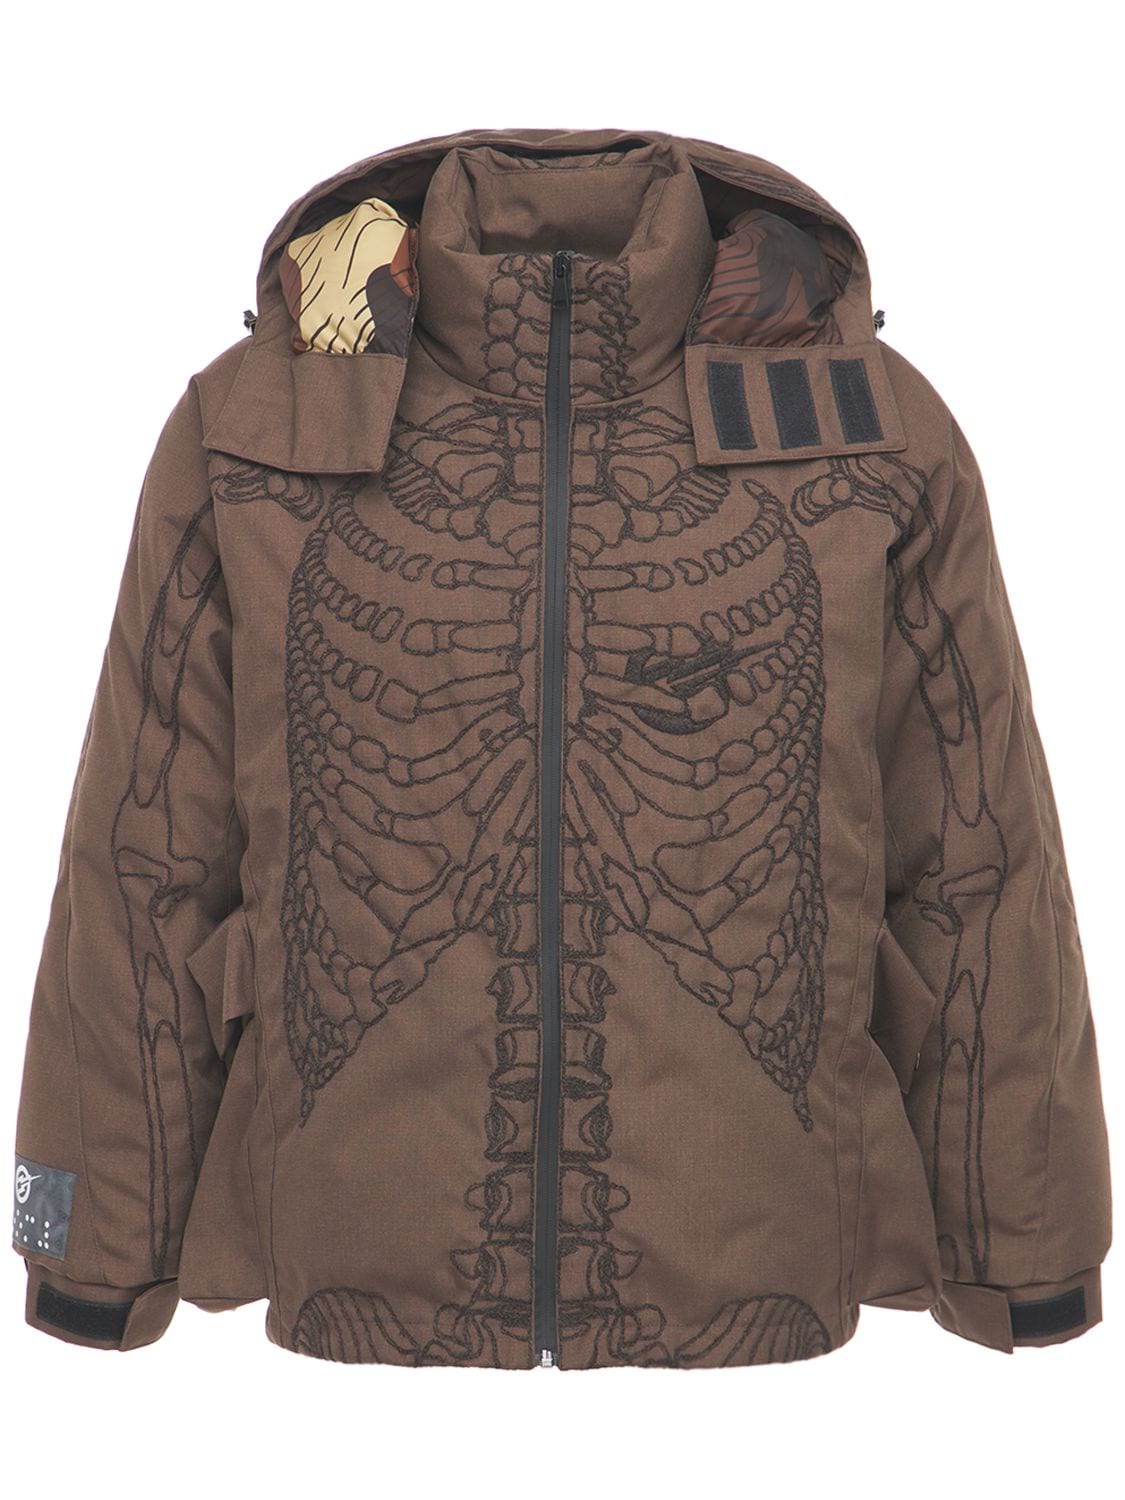 Ultrasound Embroidered Puffer Jacket